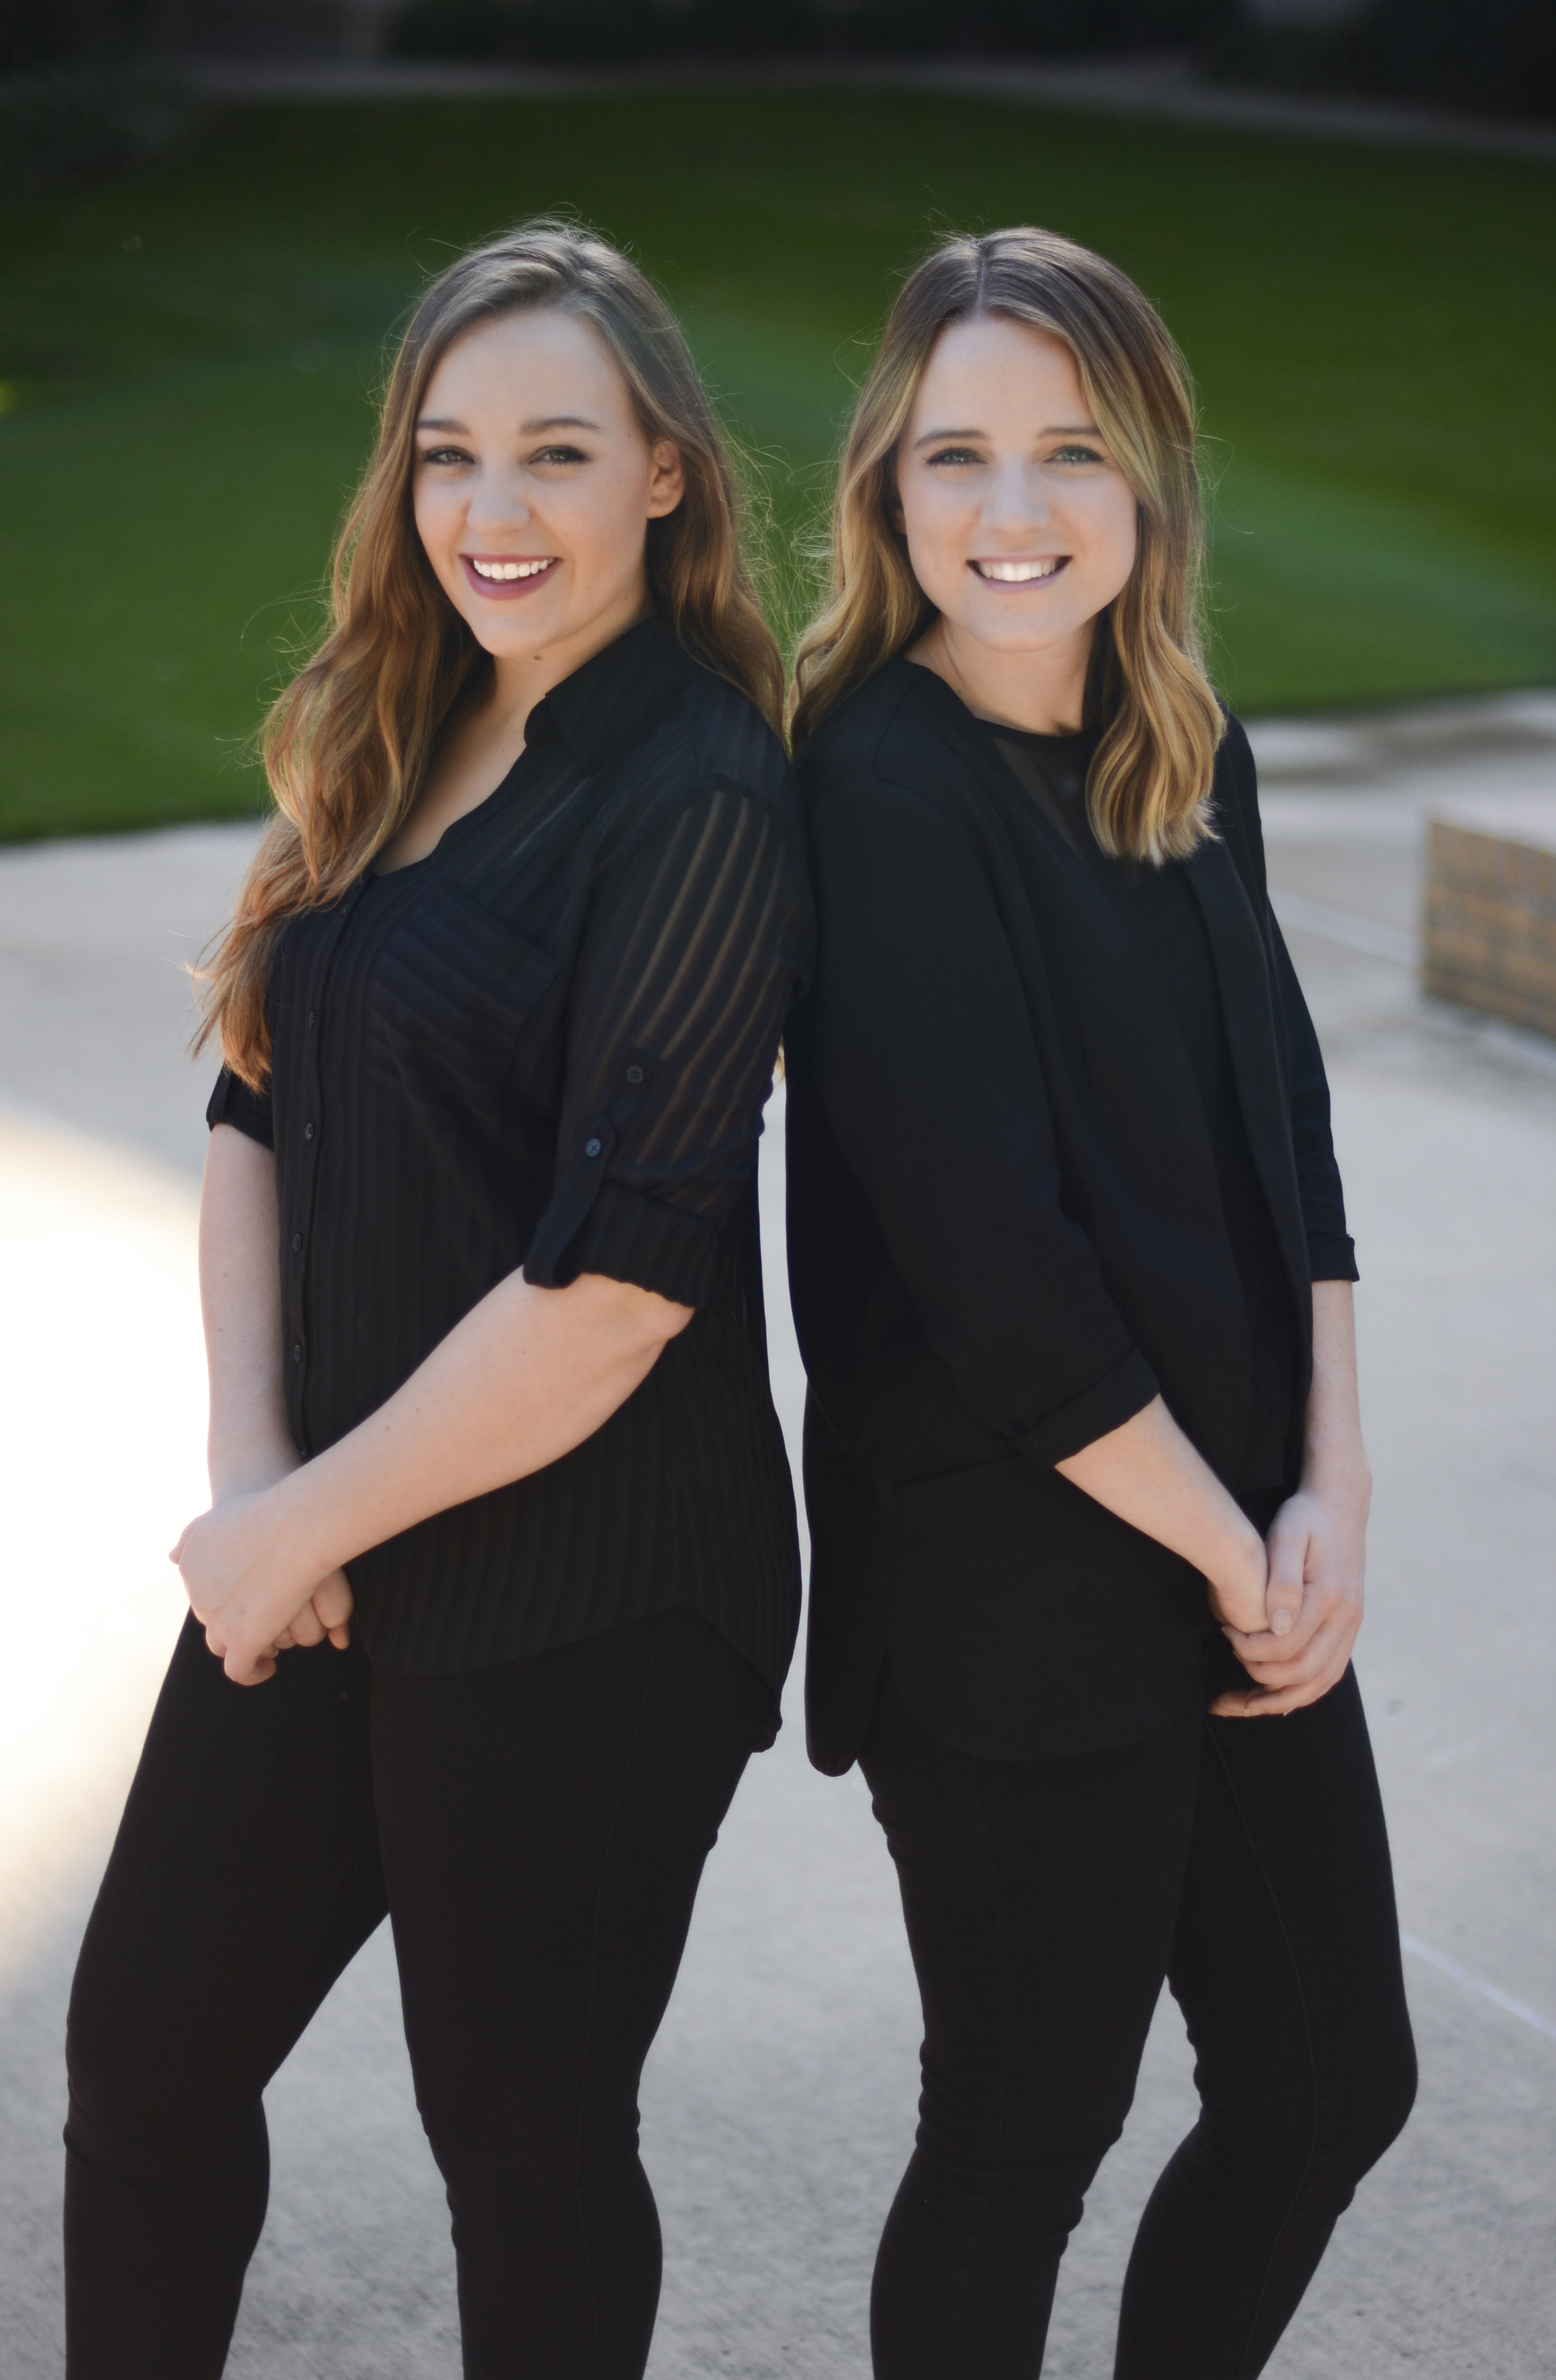 Team members Sarah Muller (left) and Hailey Turner (right) were one of the top three teams to compete in the 2017 National Retail Federation Foundation Student Challenge. Photo credit: Michaela Bull. 